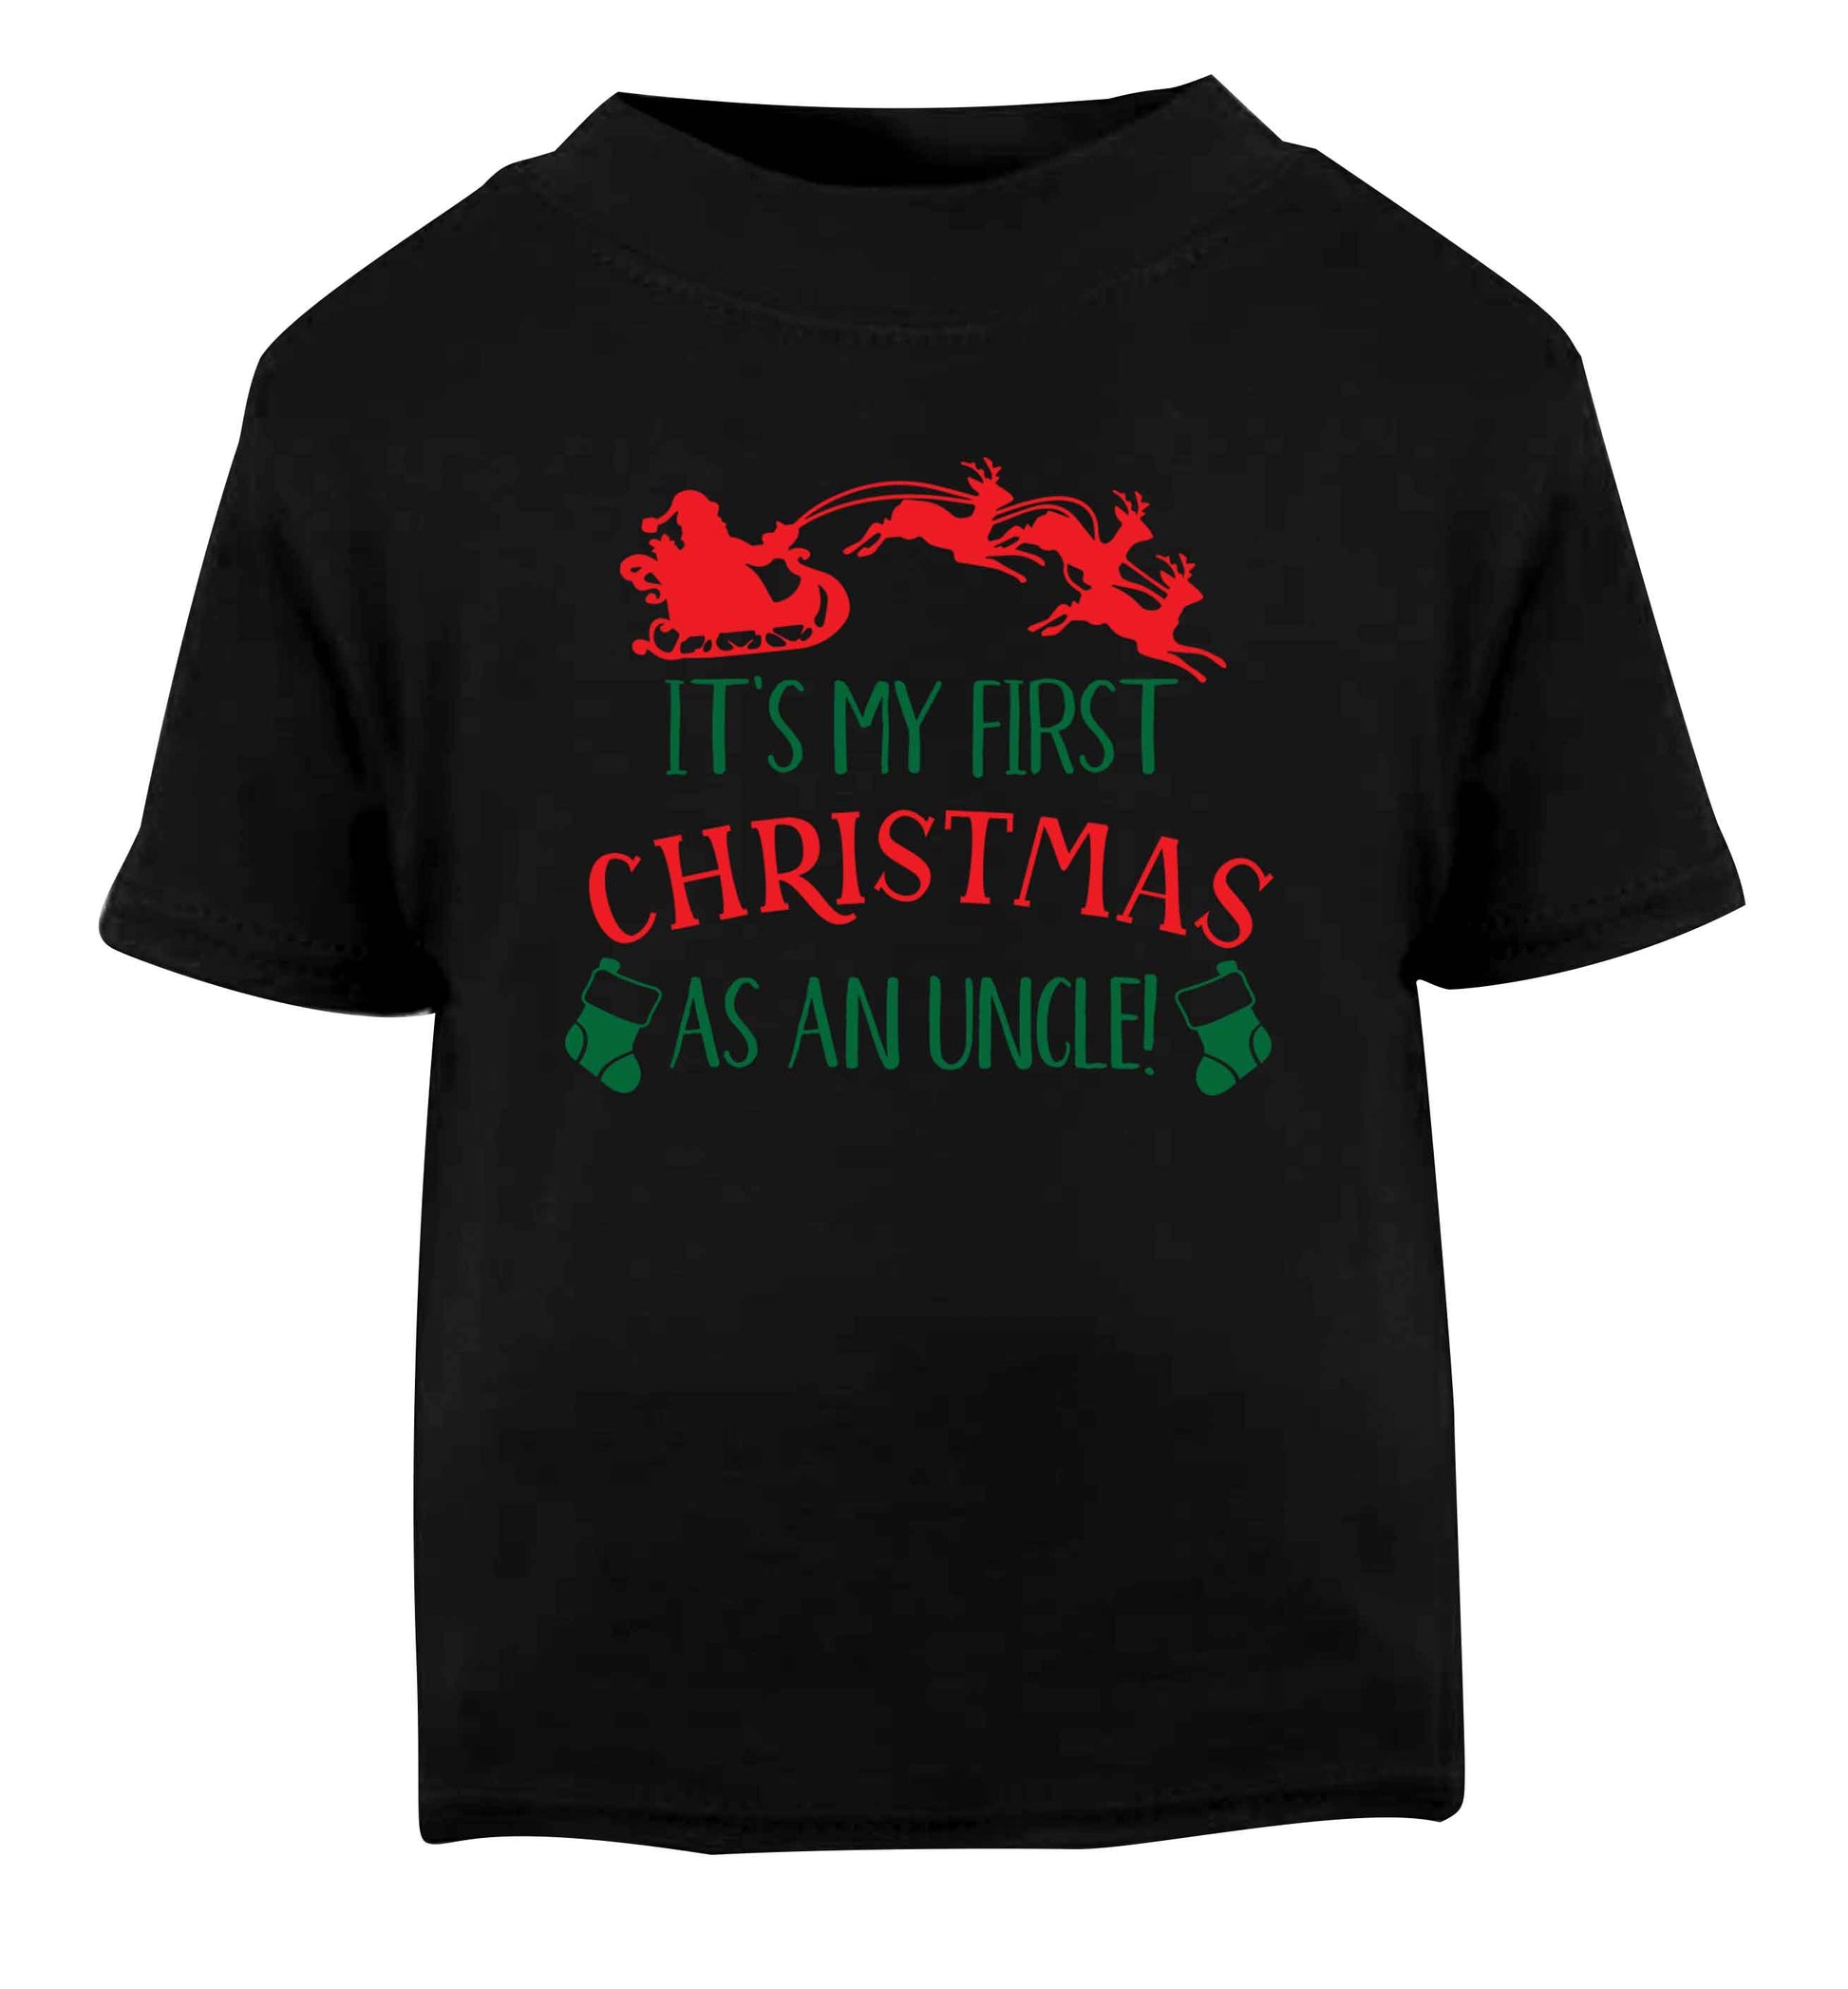 It's my first Christmas as an uncle! Black Baby Toddler Tshirt 2 years